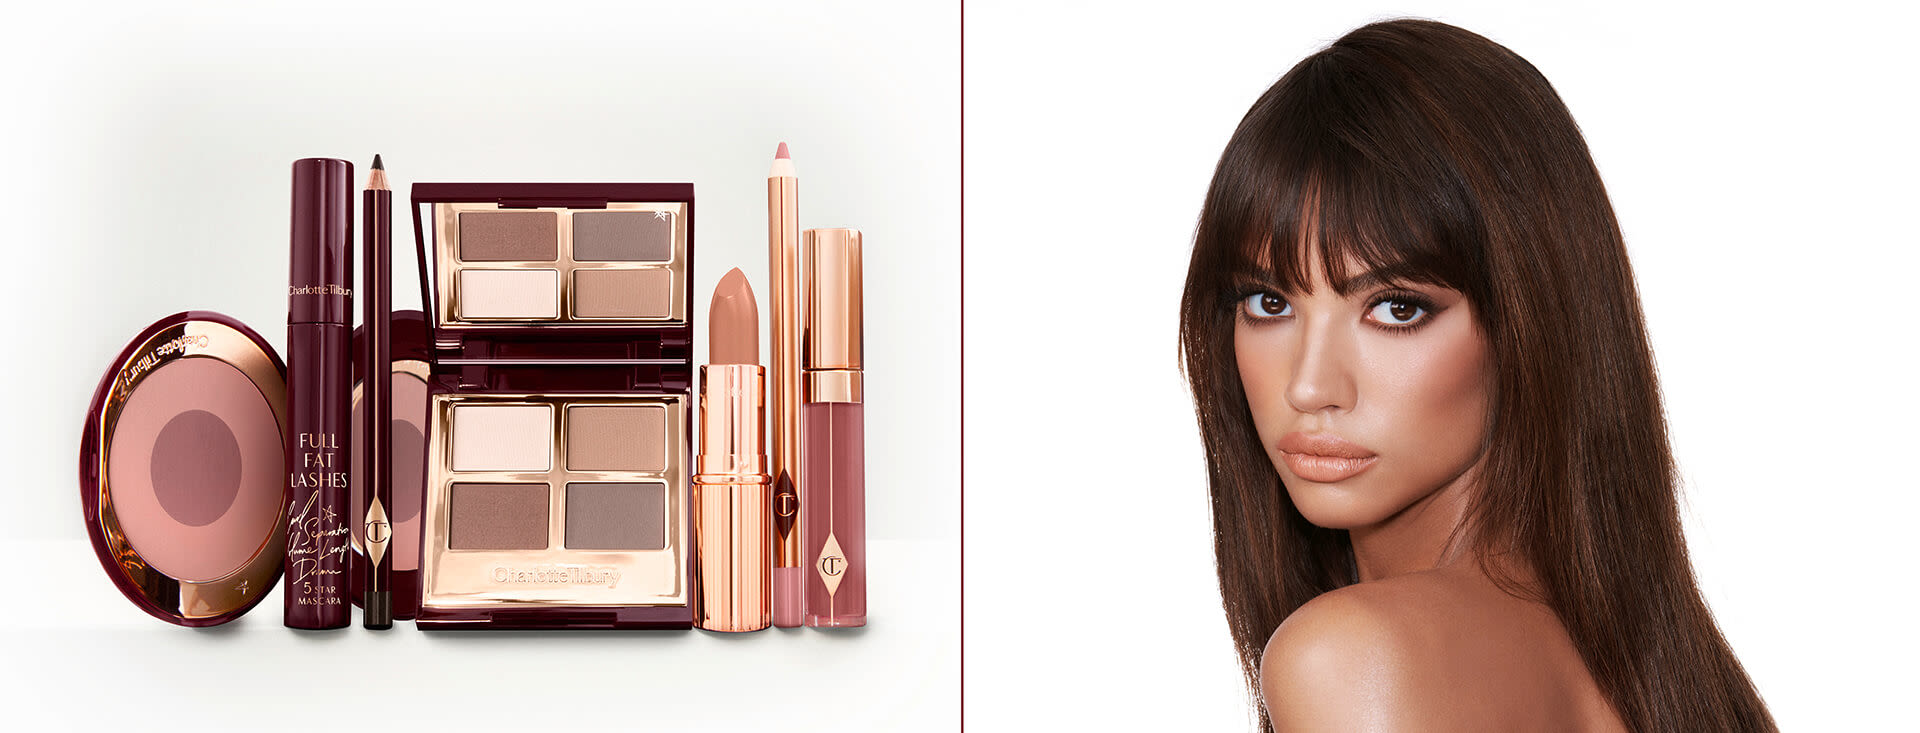 A medium-tone model with brown eyes wearing smokey brown eye makeup with muted pink blush with glossy soft-brown lips along with 7 makeup products, which are a quad eyeshadow palette in shades of champagne, gold, and bronze, a dark brown eyeliner pencil, mascara, a two-tone brown and pink powder blush, tawny-brown lip liner, a terracotta lipstick, and a deep pinkish-red lip gloss. 